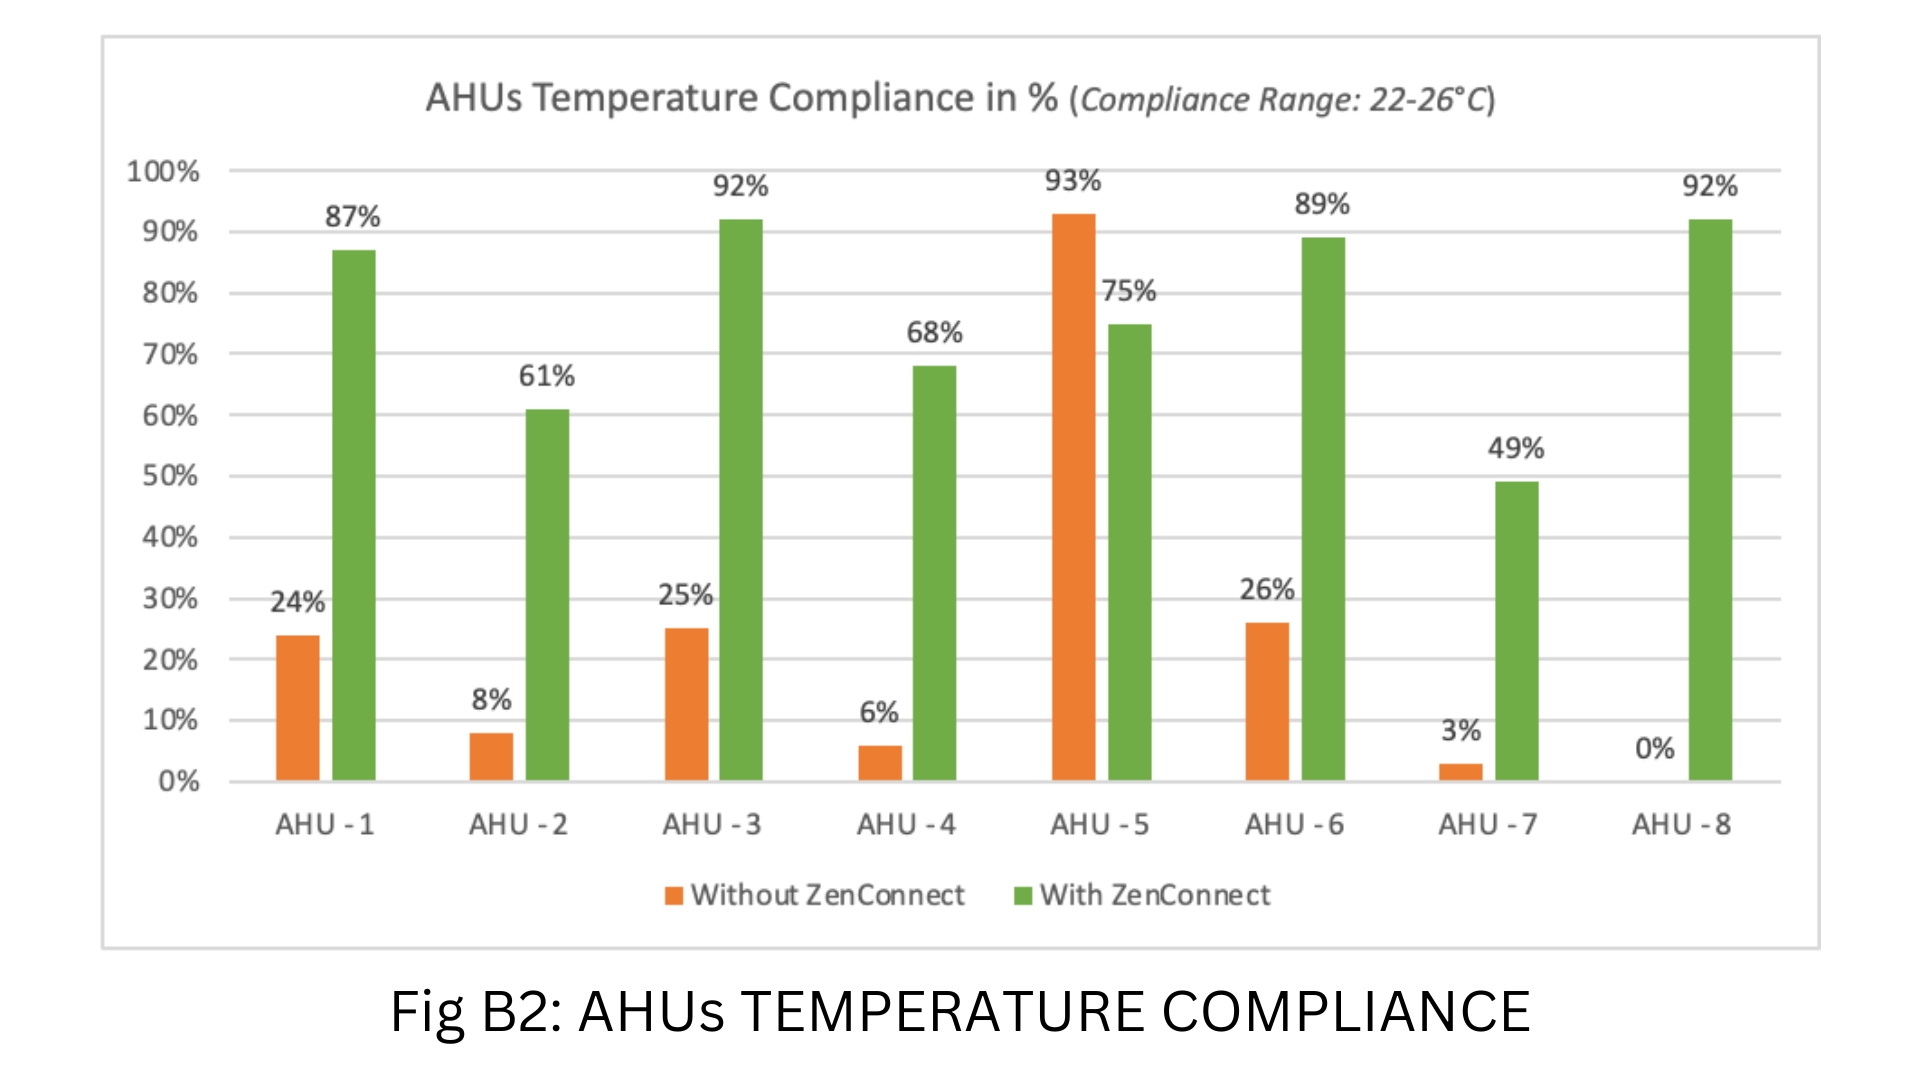 AHU temperature compliance maintained by IoT based energy & asset management